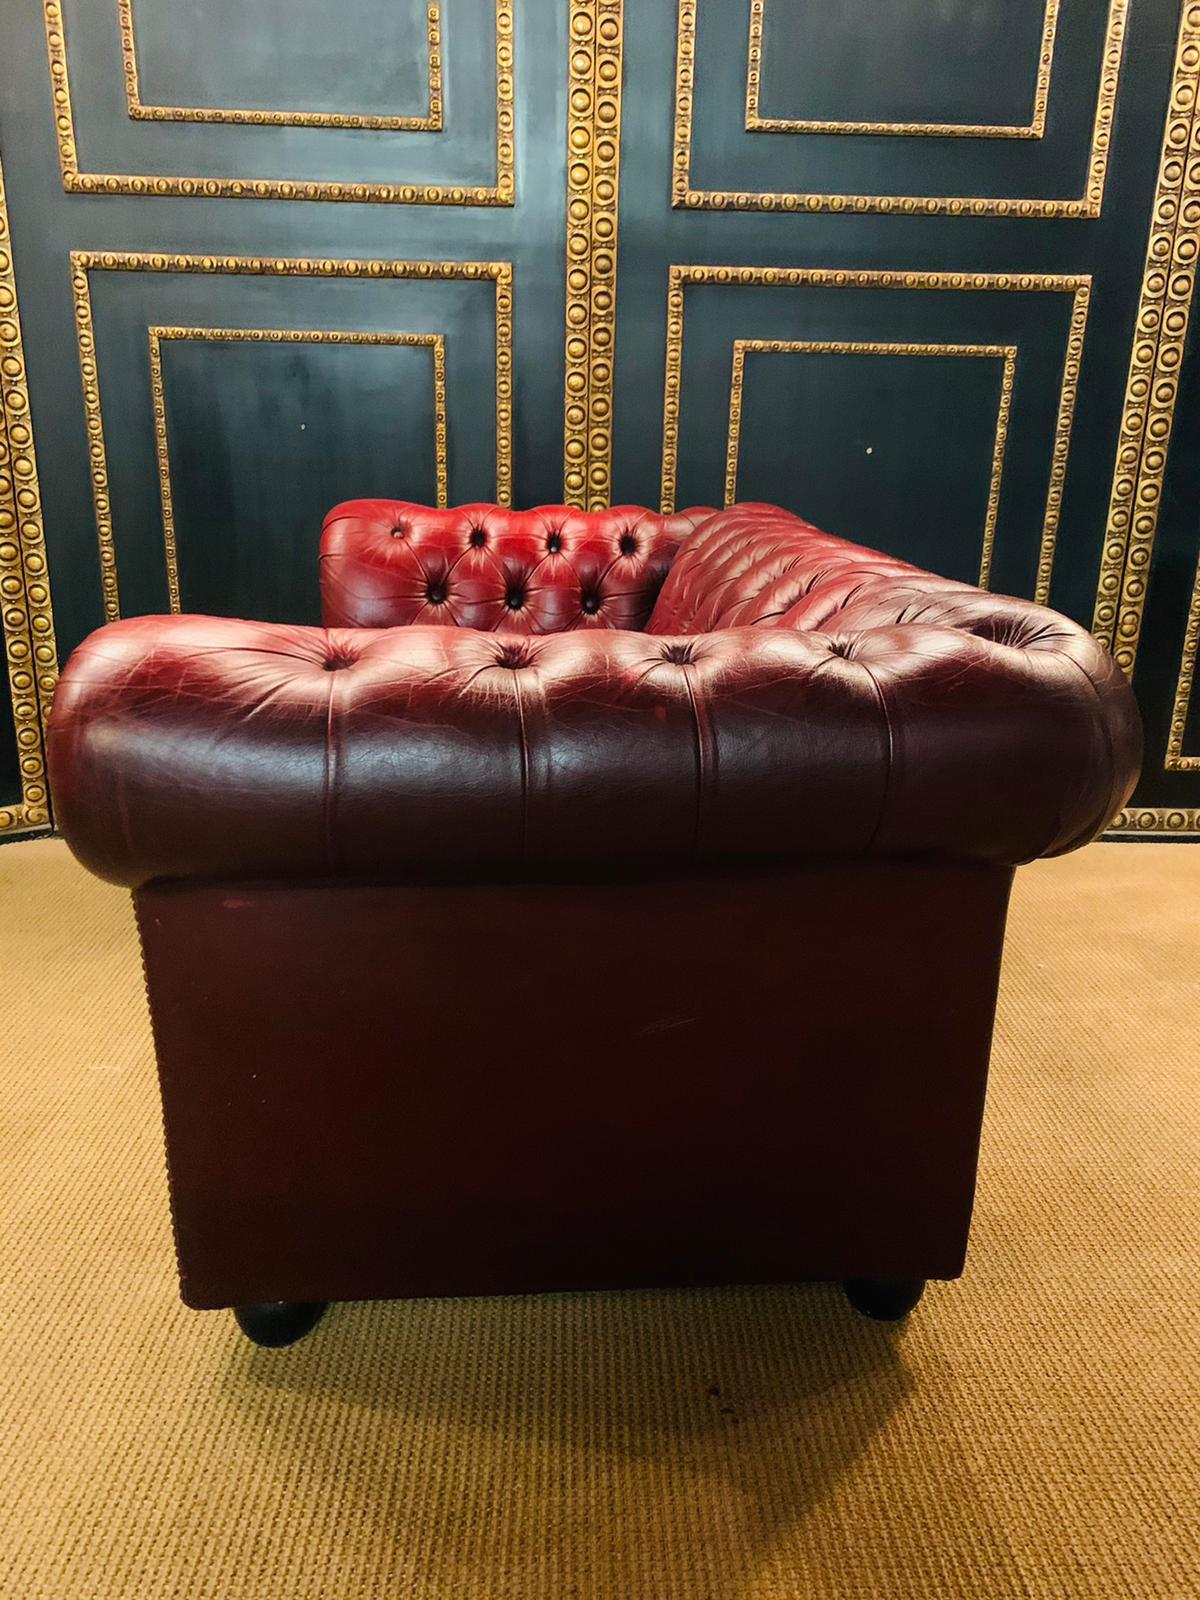 Stunning Vintage English Red Leather Chesterfield Sofa Made by Pendragon 10